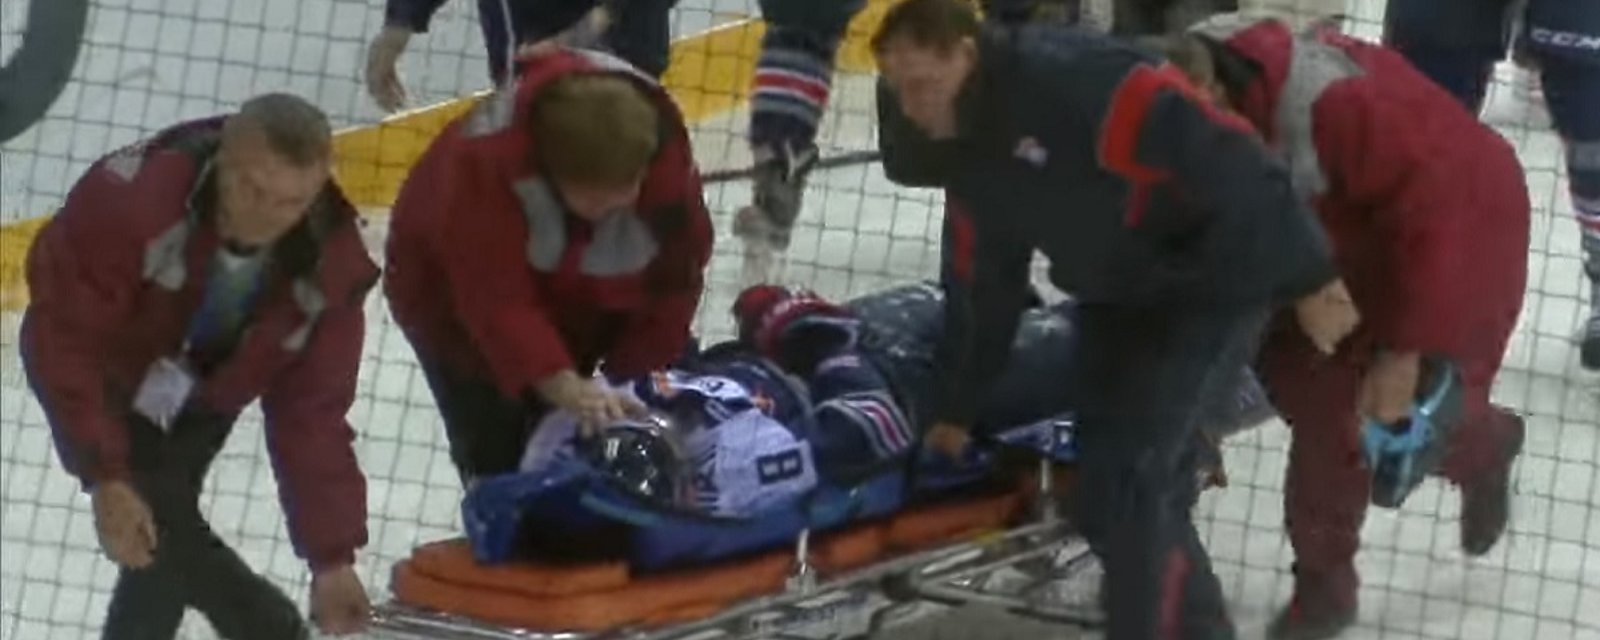 Former first round pick suffers horrific neck and spine injury after brutal on-ice accident.